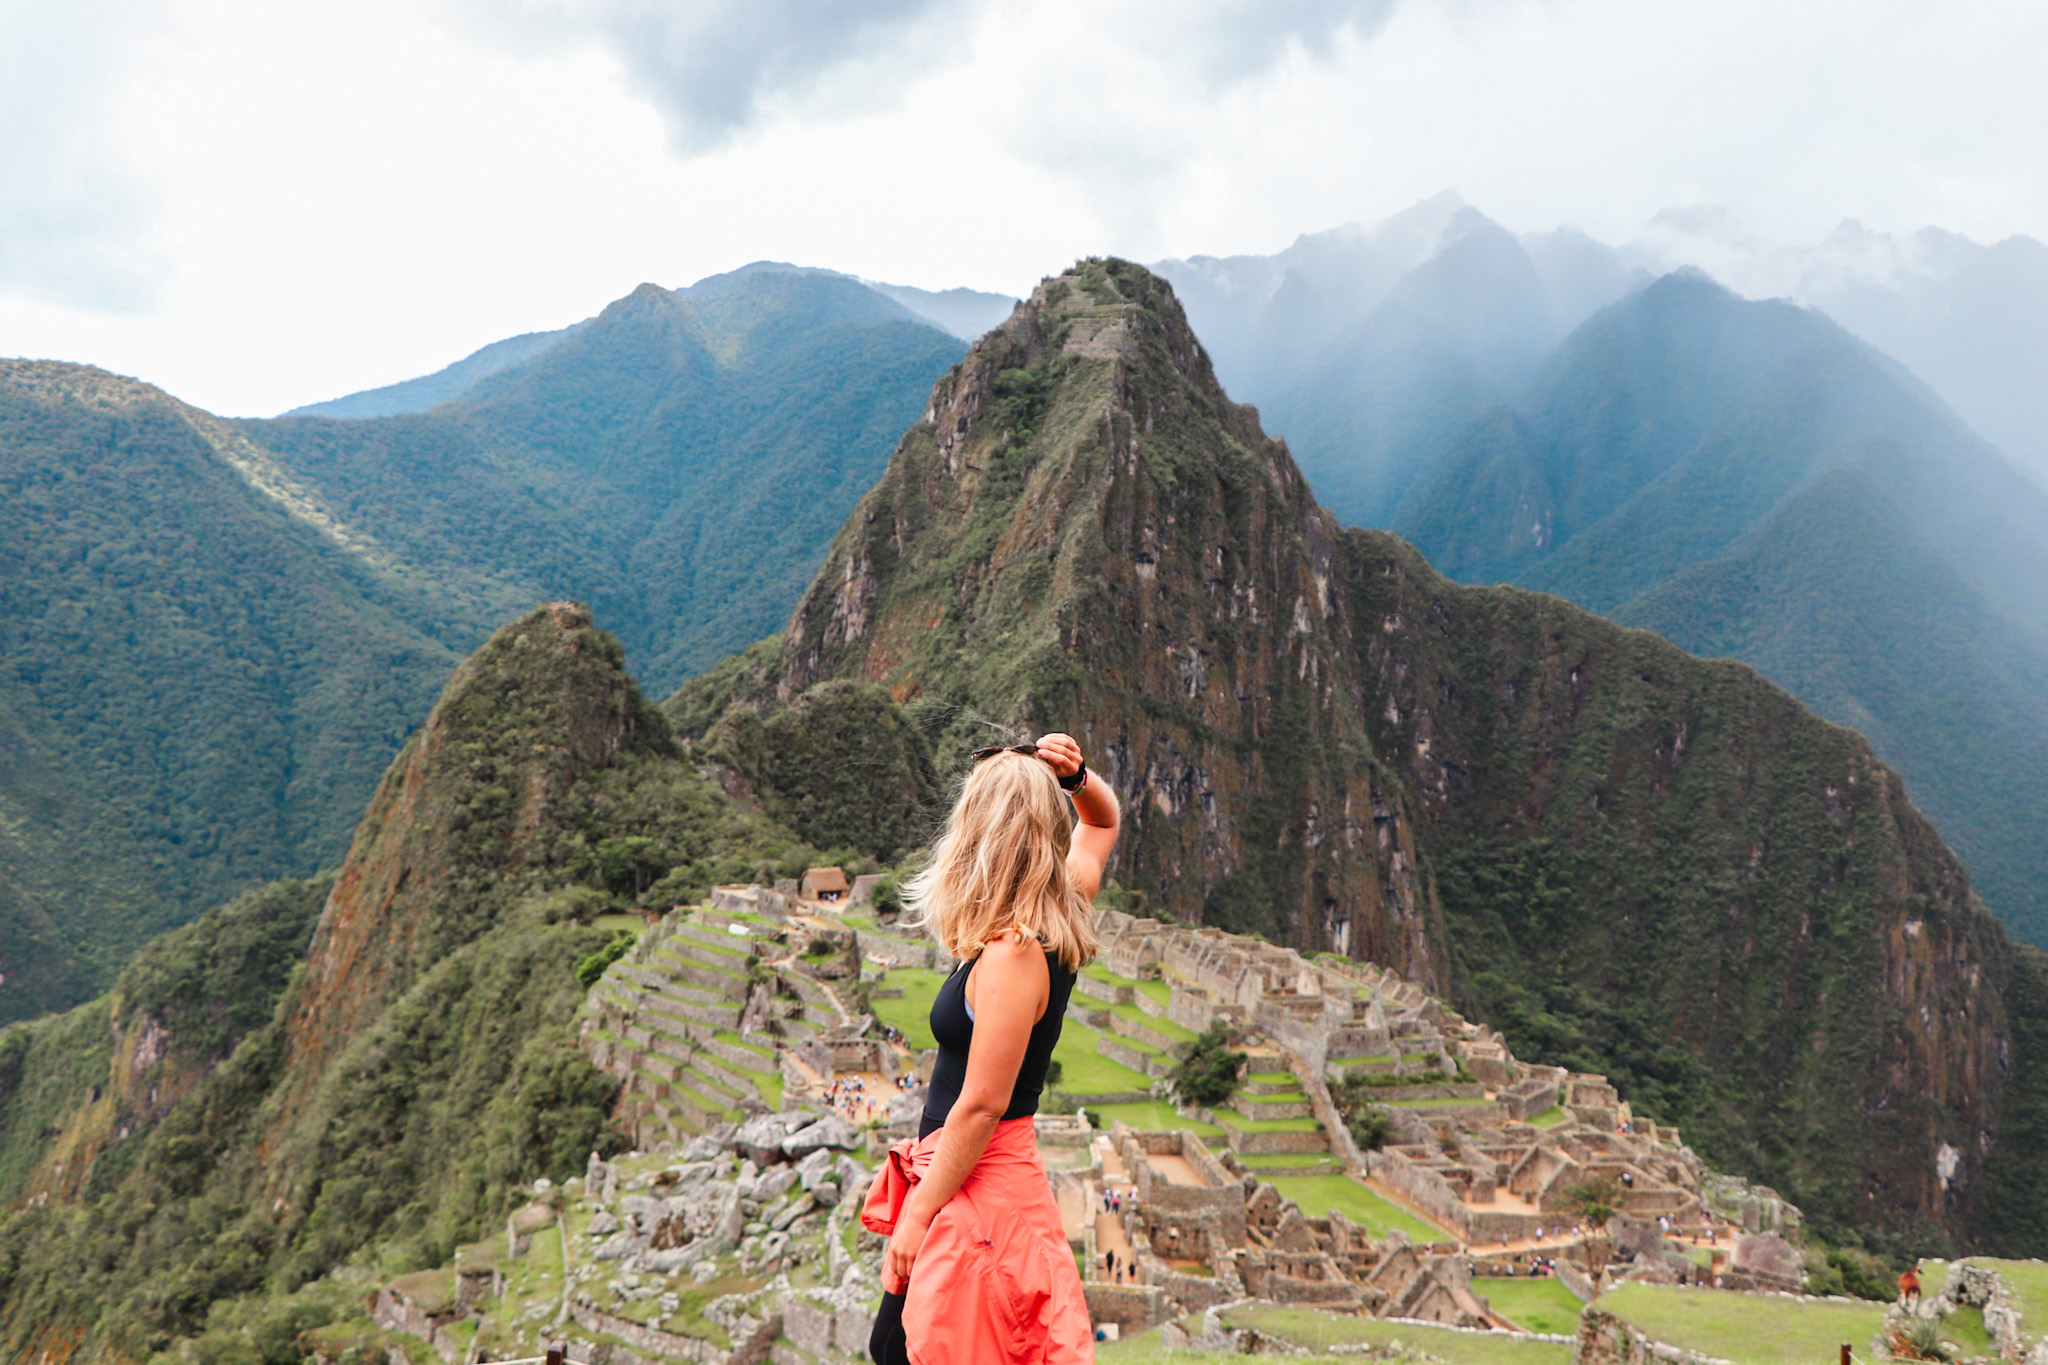 Interesting Facts about Machu Picchu in Peru: Postcard views over the legendary citadel